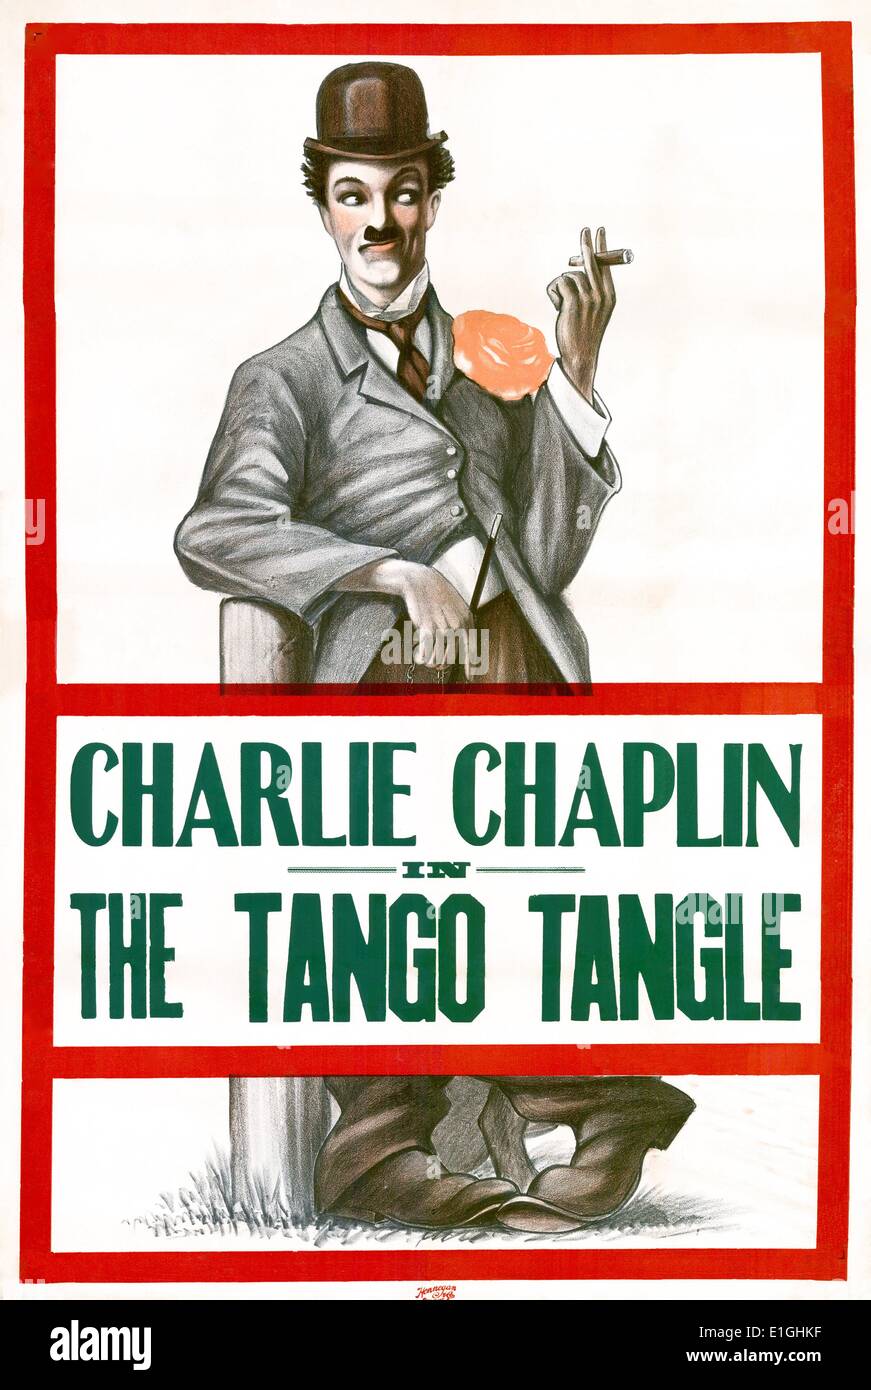 The Tango Tangle a 1914 American-made motion picture starring Charlie Chaplin and Fatty Arbuckle. Stock Photo